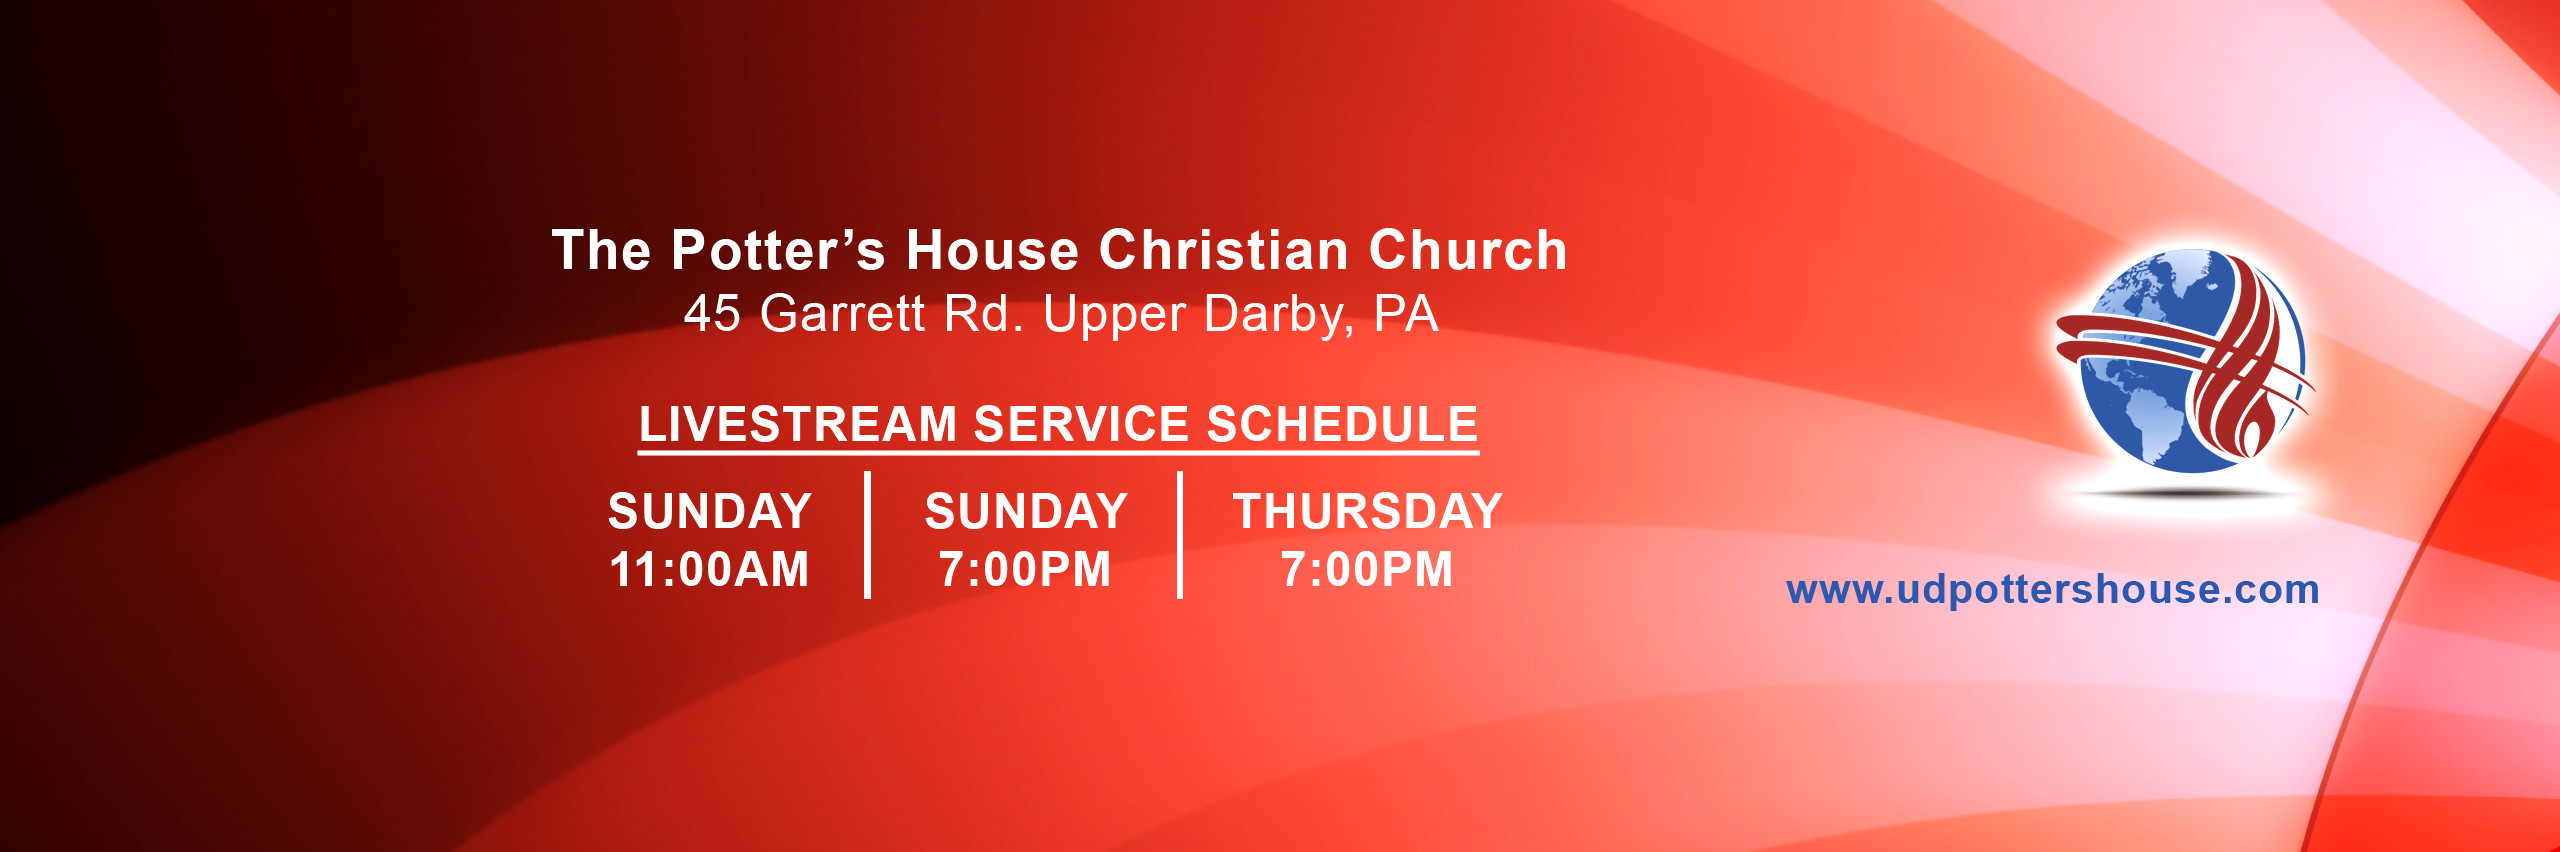 Potters House Christian Church, Upper Darby